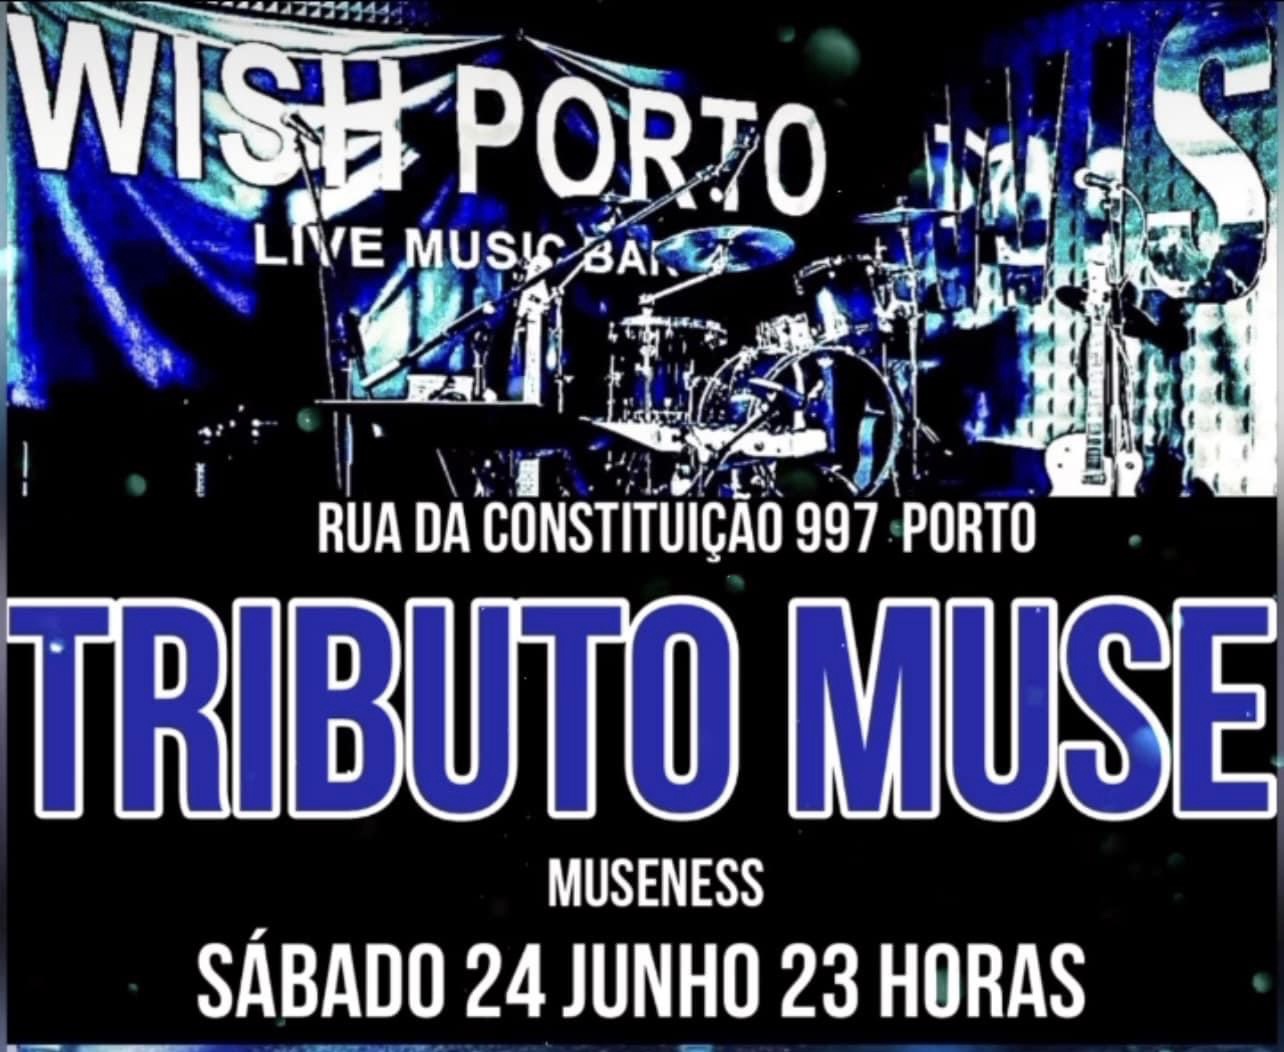 TRIBUTO MUSE